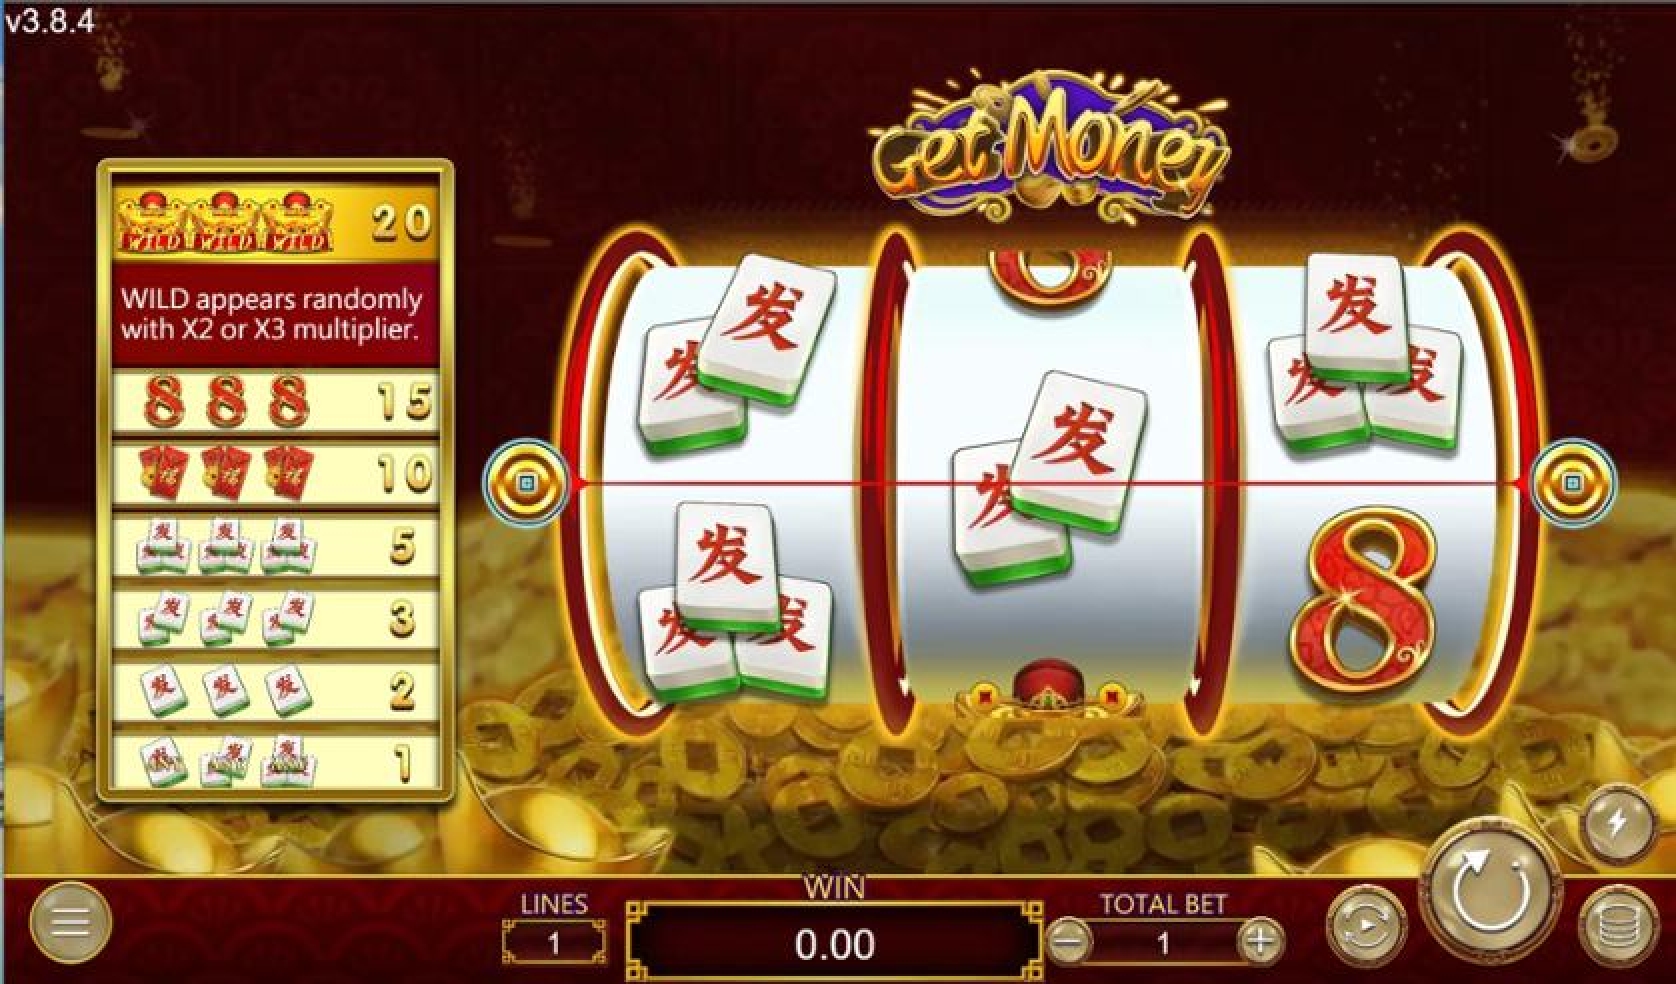 The Get Money Online Slot Demo Game by Dragoon Soft